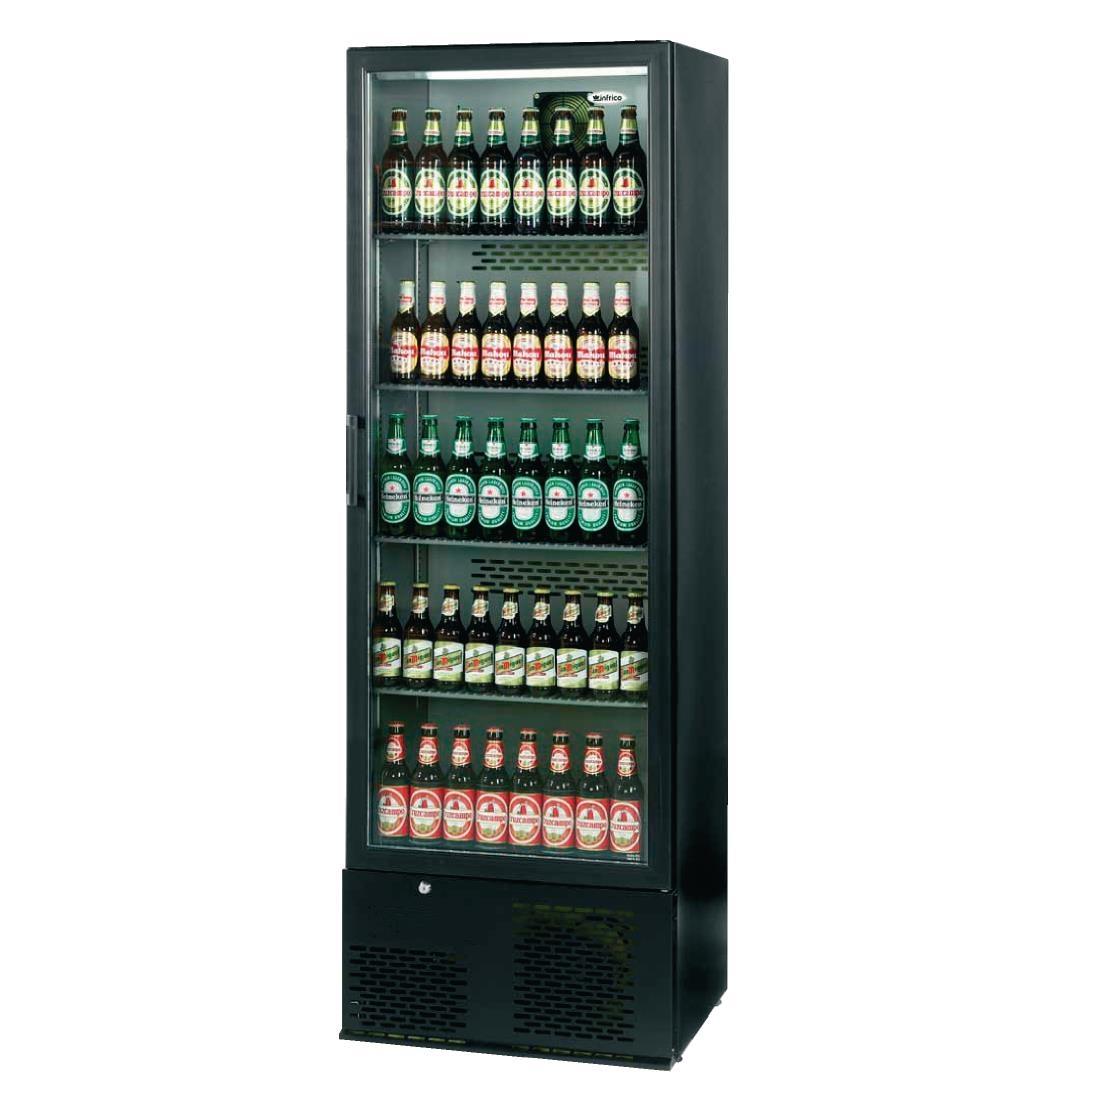 Infrico Upright Back Bar Cooler with Hinged Door in Black ZX10 - CC606  - 1